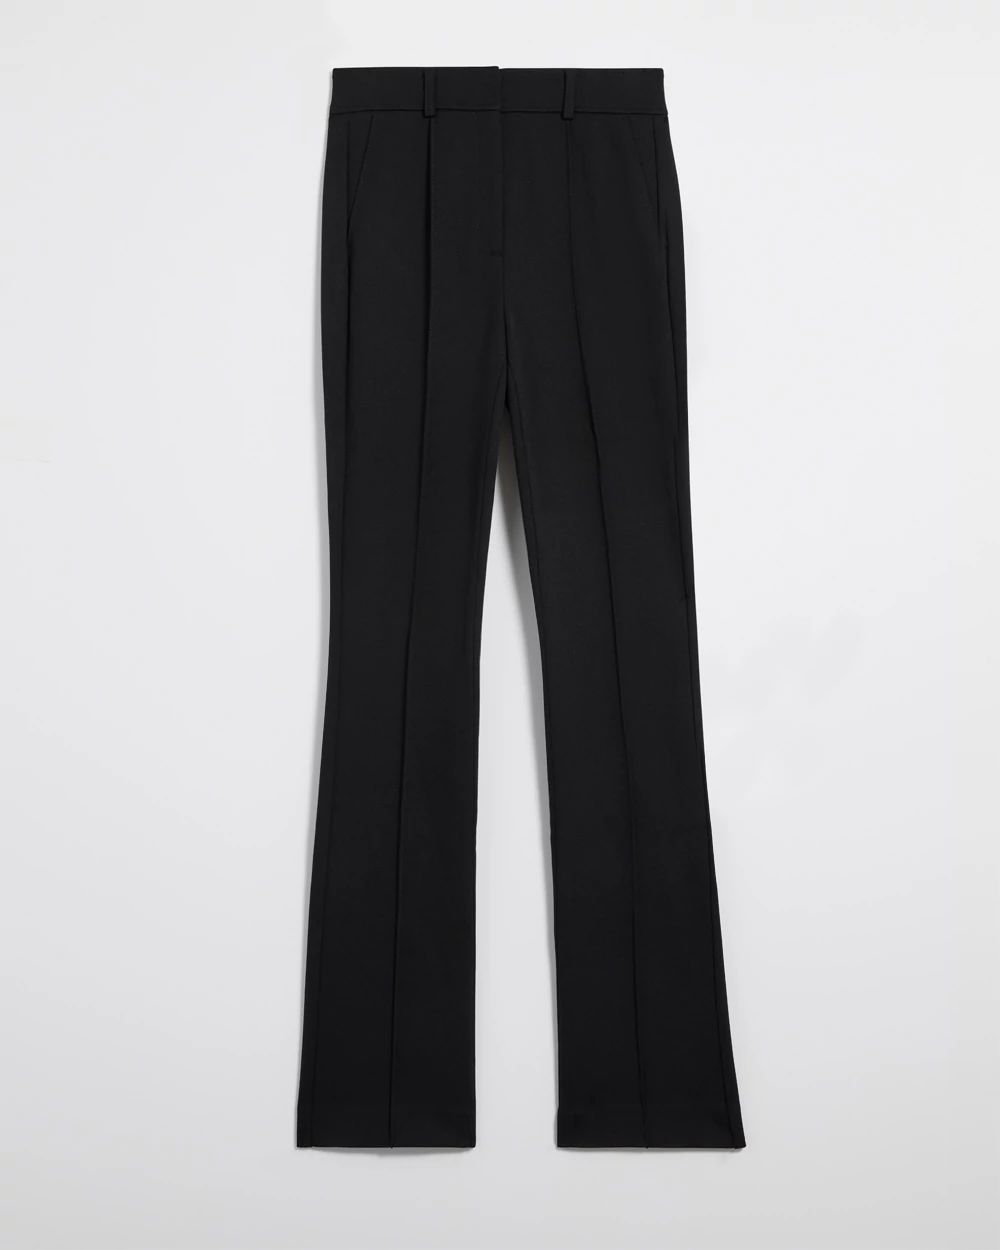 Petite Extra High-Rise Luxe Stretch Bootcut Pants click to view larger image.